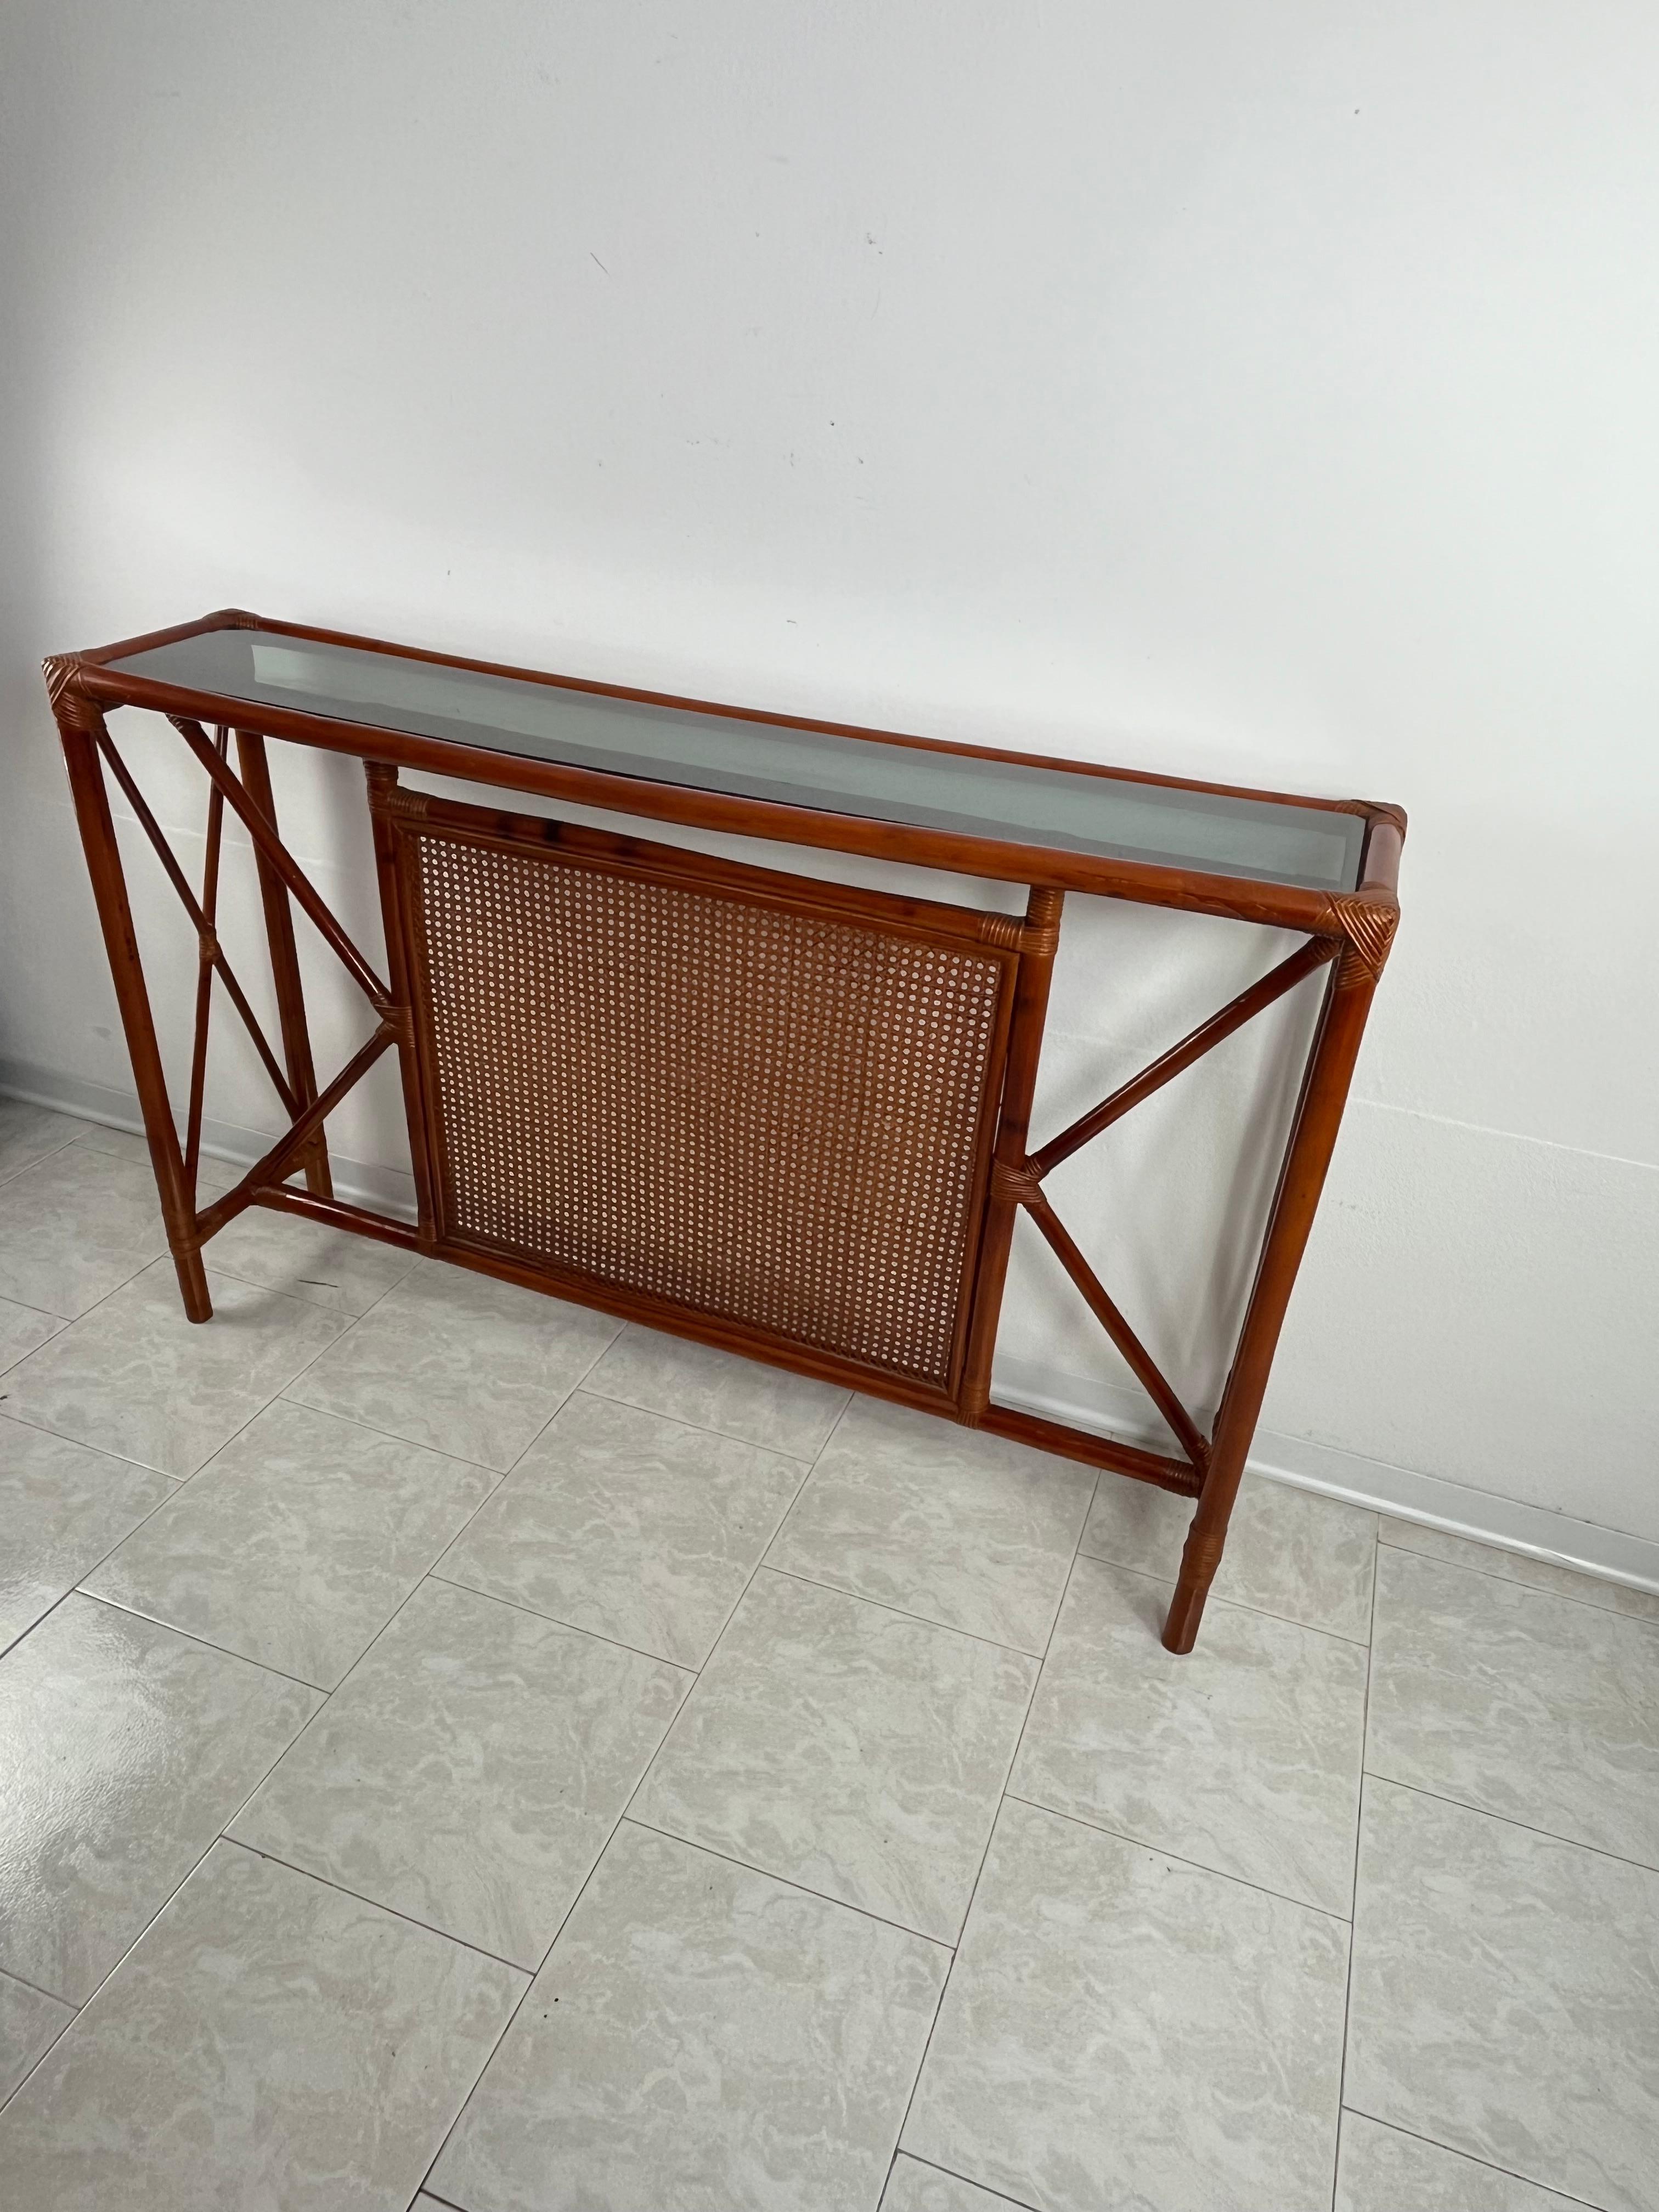 Set of 2 Bamboo and Rattan Console and Mirror Attributed to Franco Albini 1960s For Sale 3